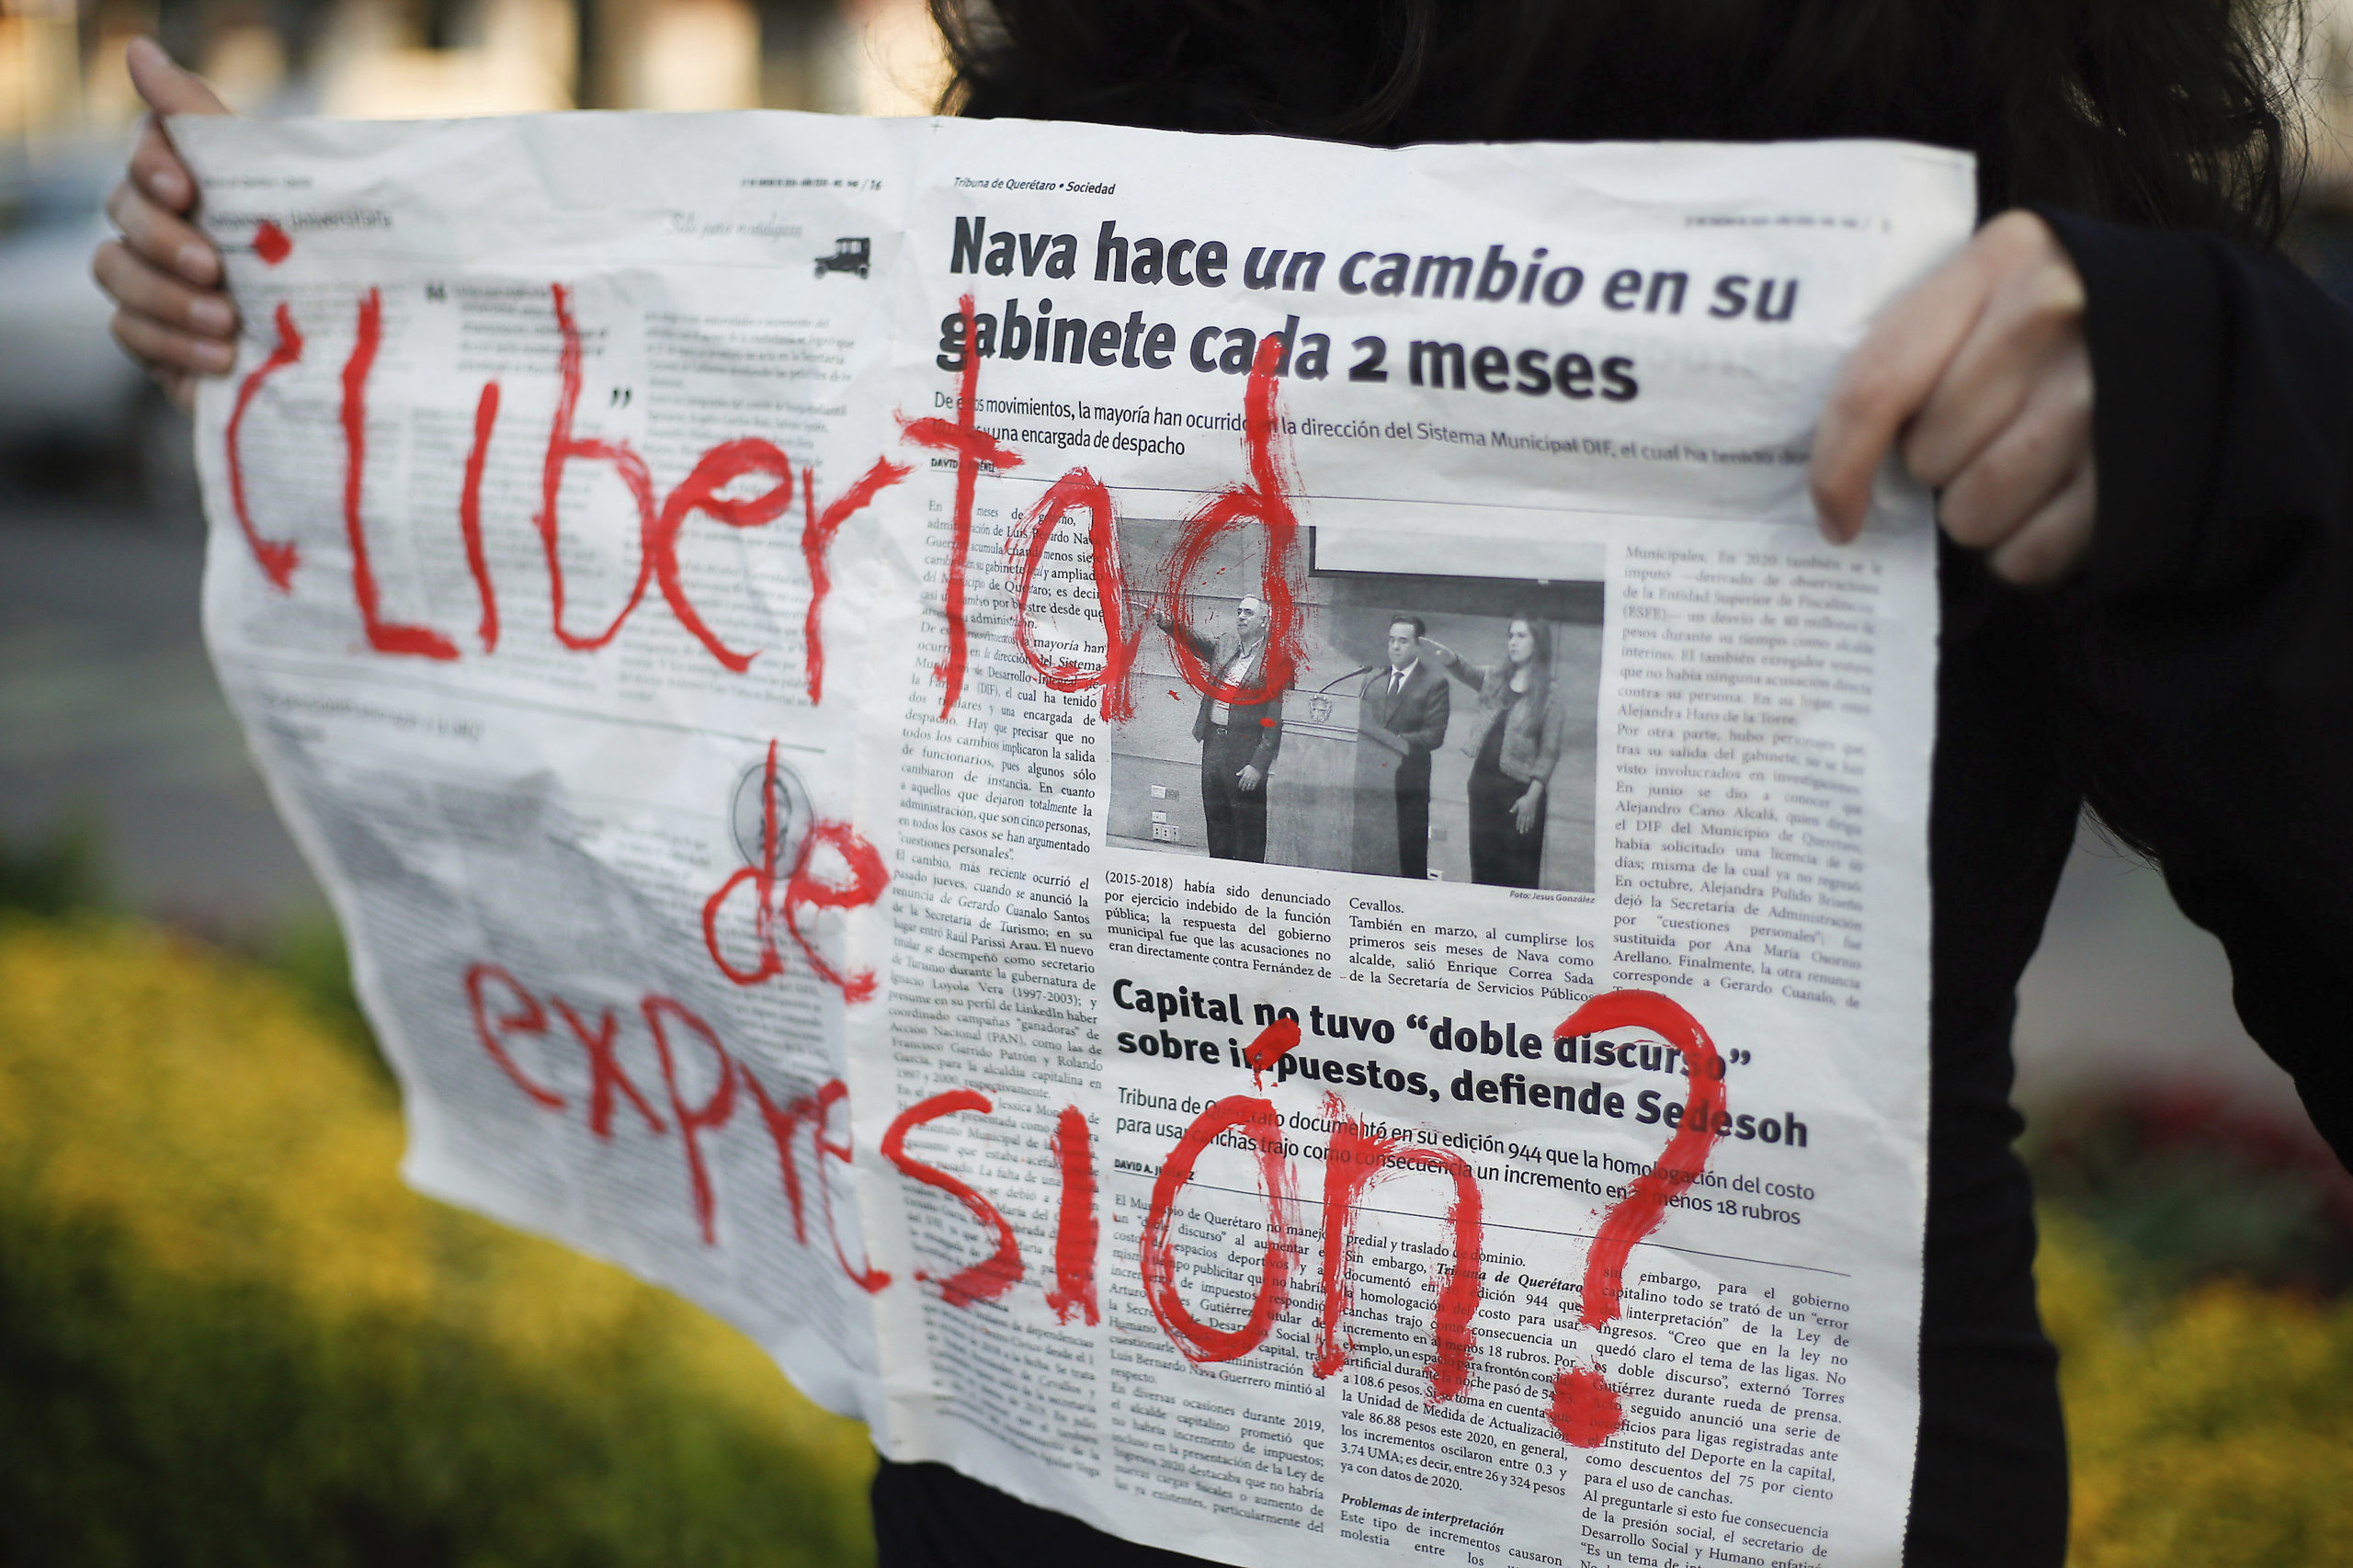 A protester holds a placard during a demonstration against the murder of the three journalists Jose Luis Arenas, Margarito Martinez and Lourdes Maldonado. From 2000 to date, ARTICLE 19 has documented 148 murders of journalists in Mexico, possibly related to their work. Of the total, 136 are men and 12 are women.